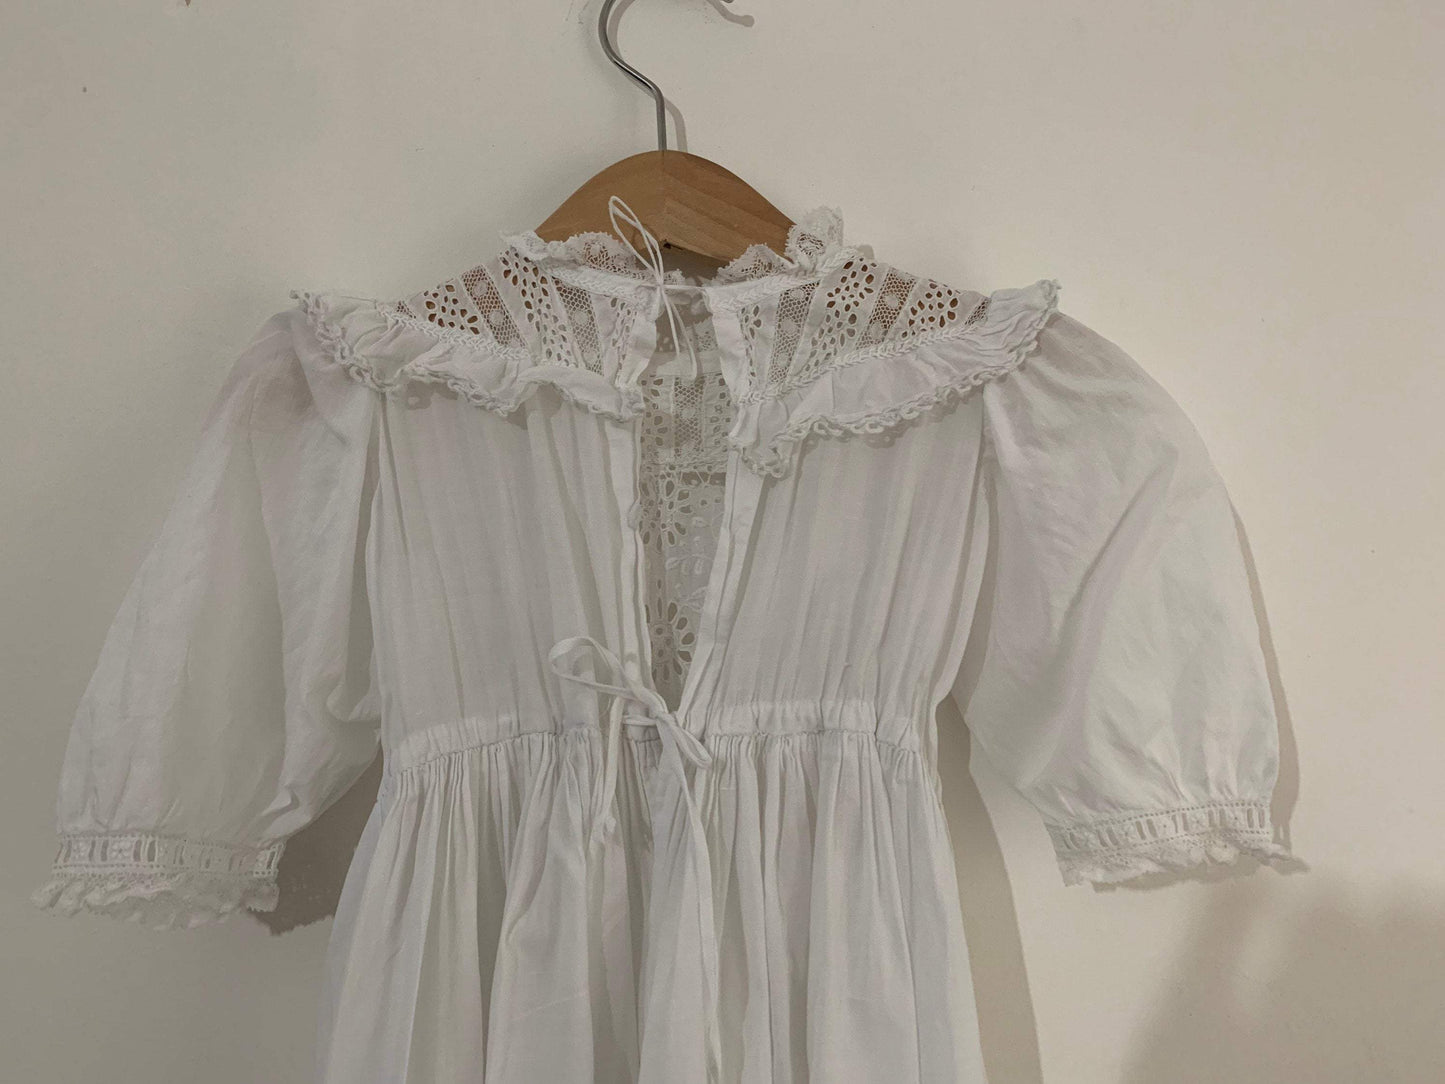 Pretty Vintage - Hand Curated Vintage Antique Christening Gown, 19th Century Christening Gown, Heirloom Broiderie Anglais Christening Gown, Antique Dress, White Dolls Dress